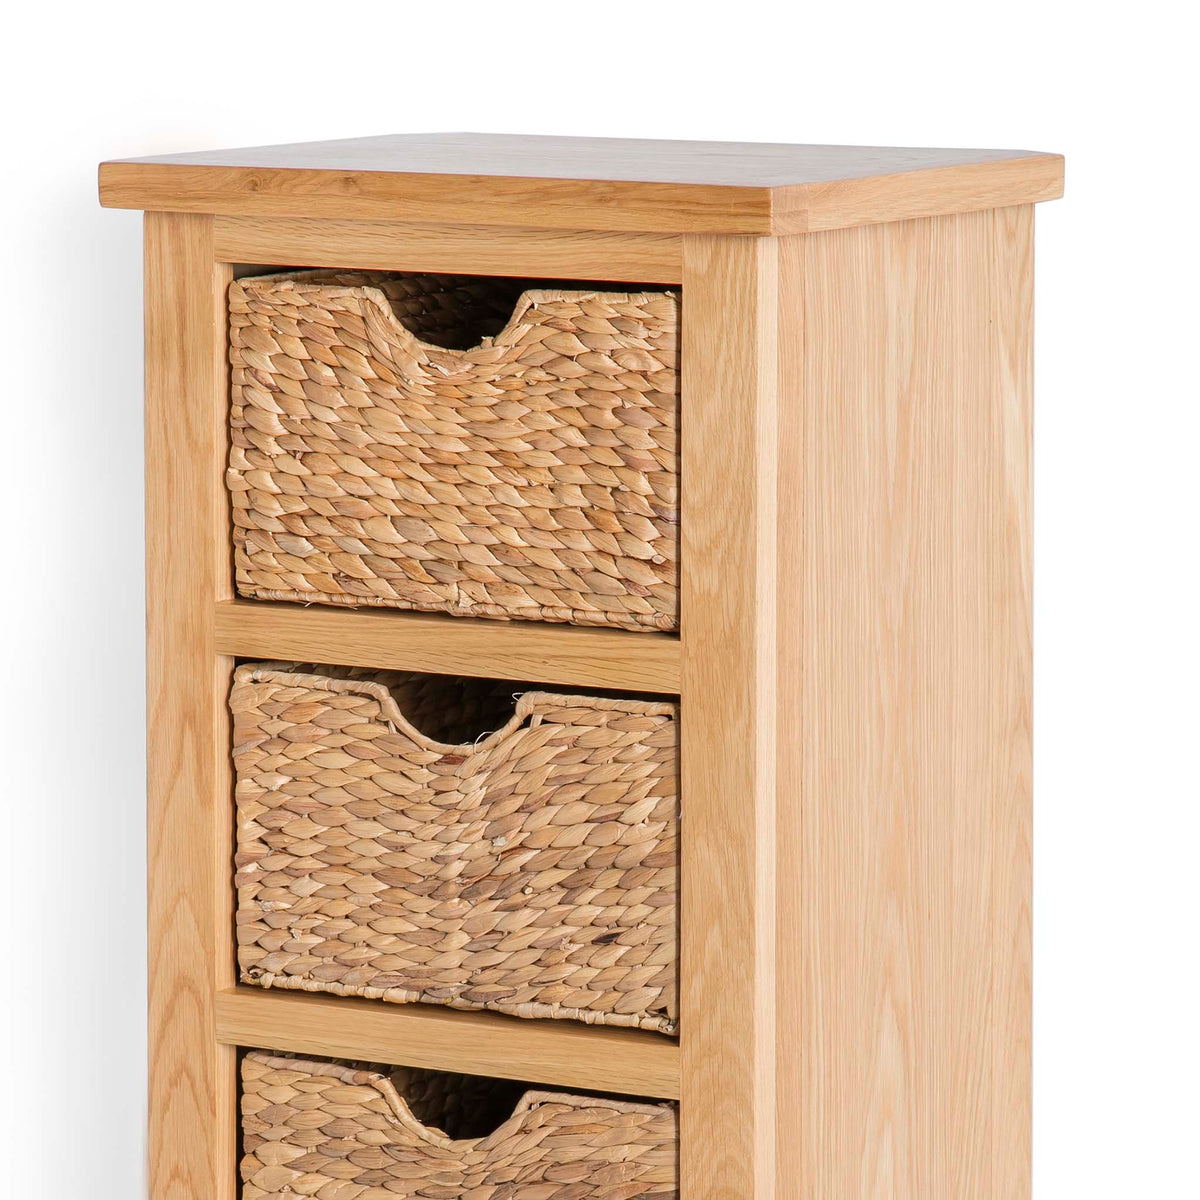 London Oak Tallboy with Baskets - Close up of top of tallboy